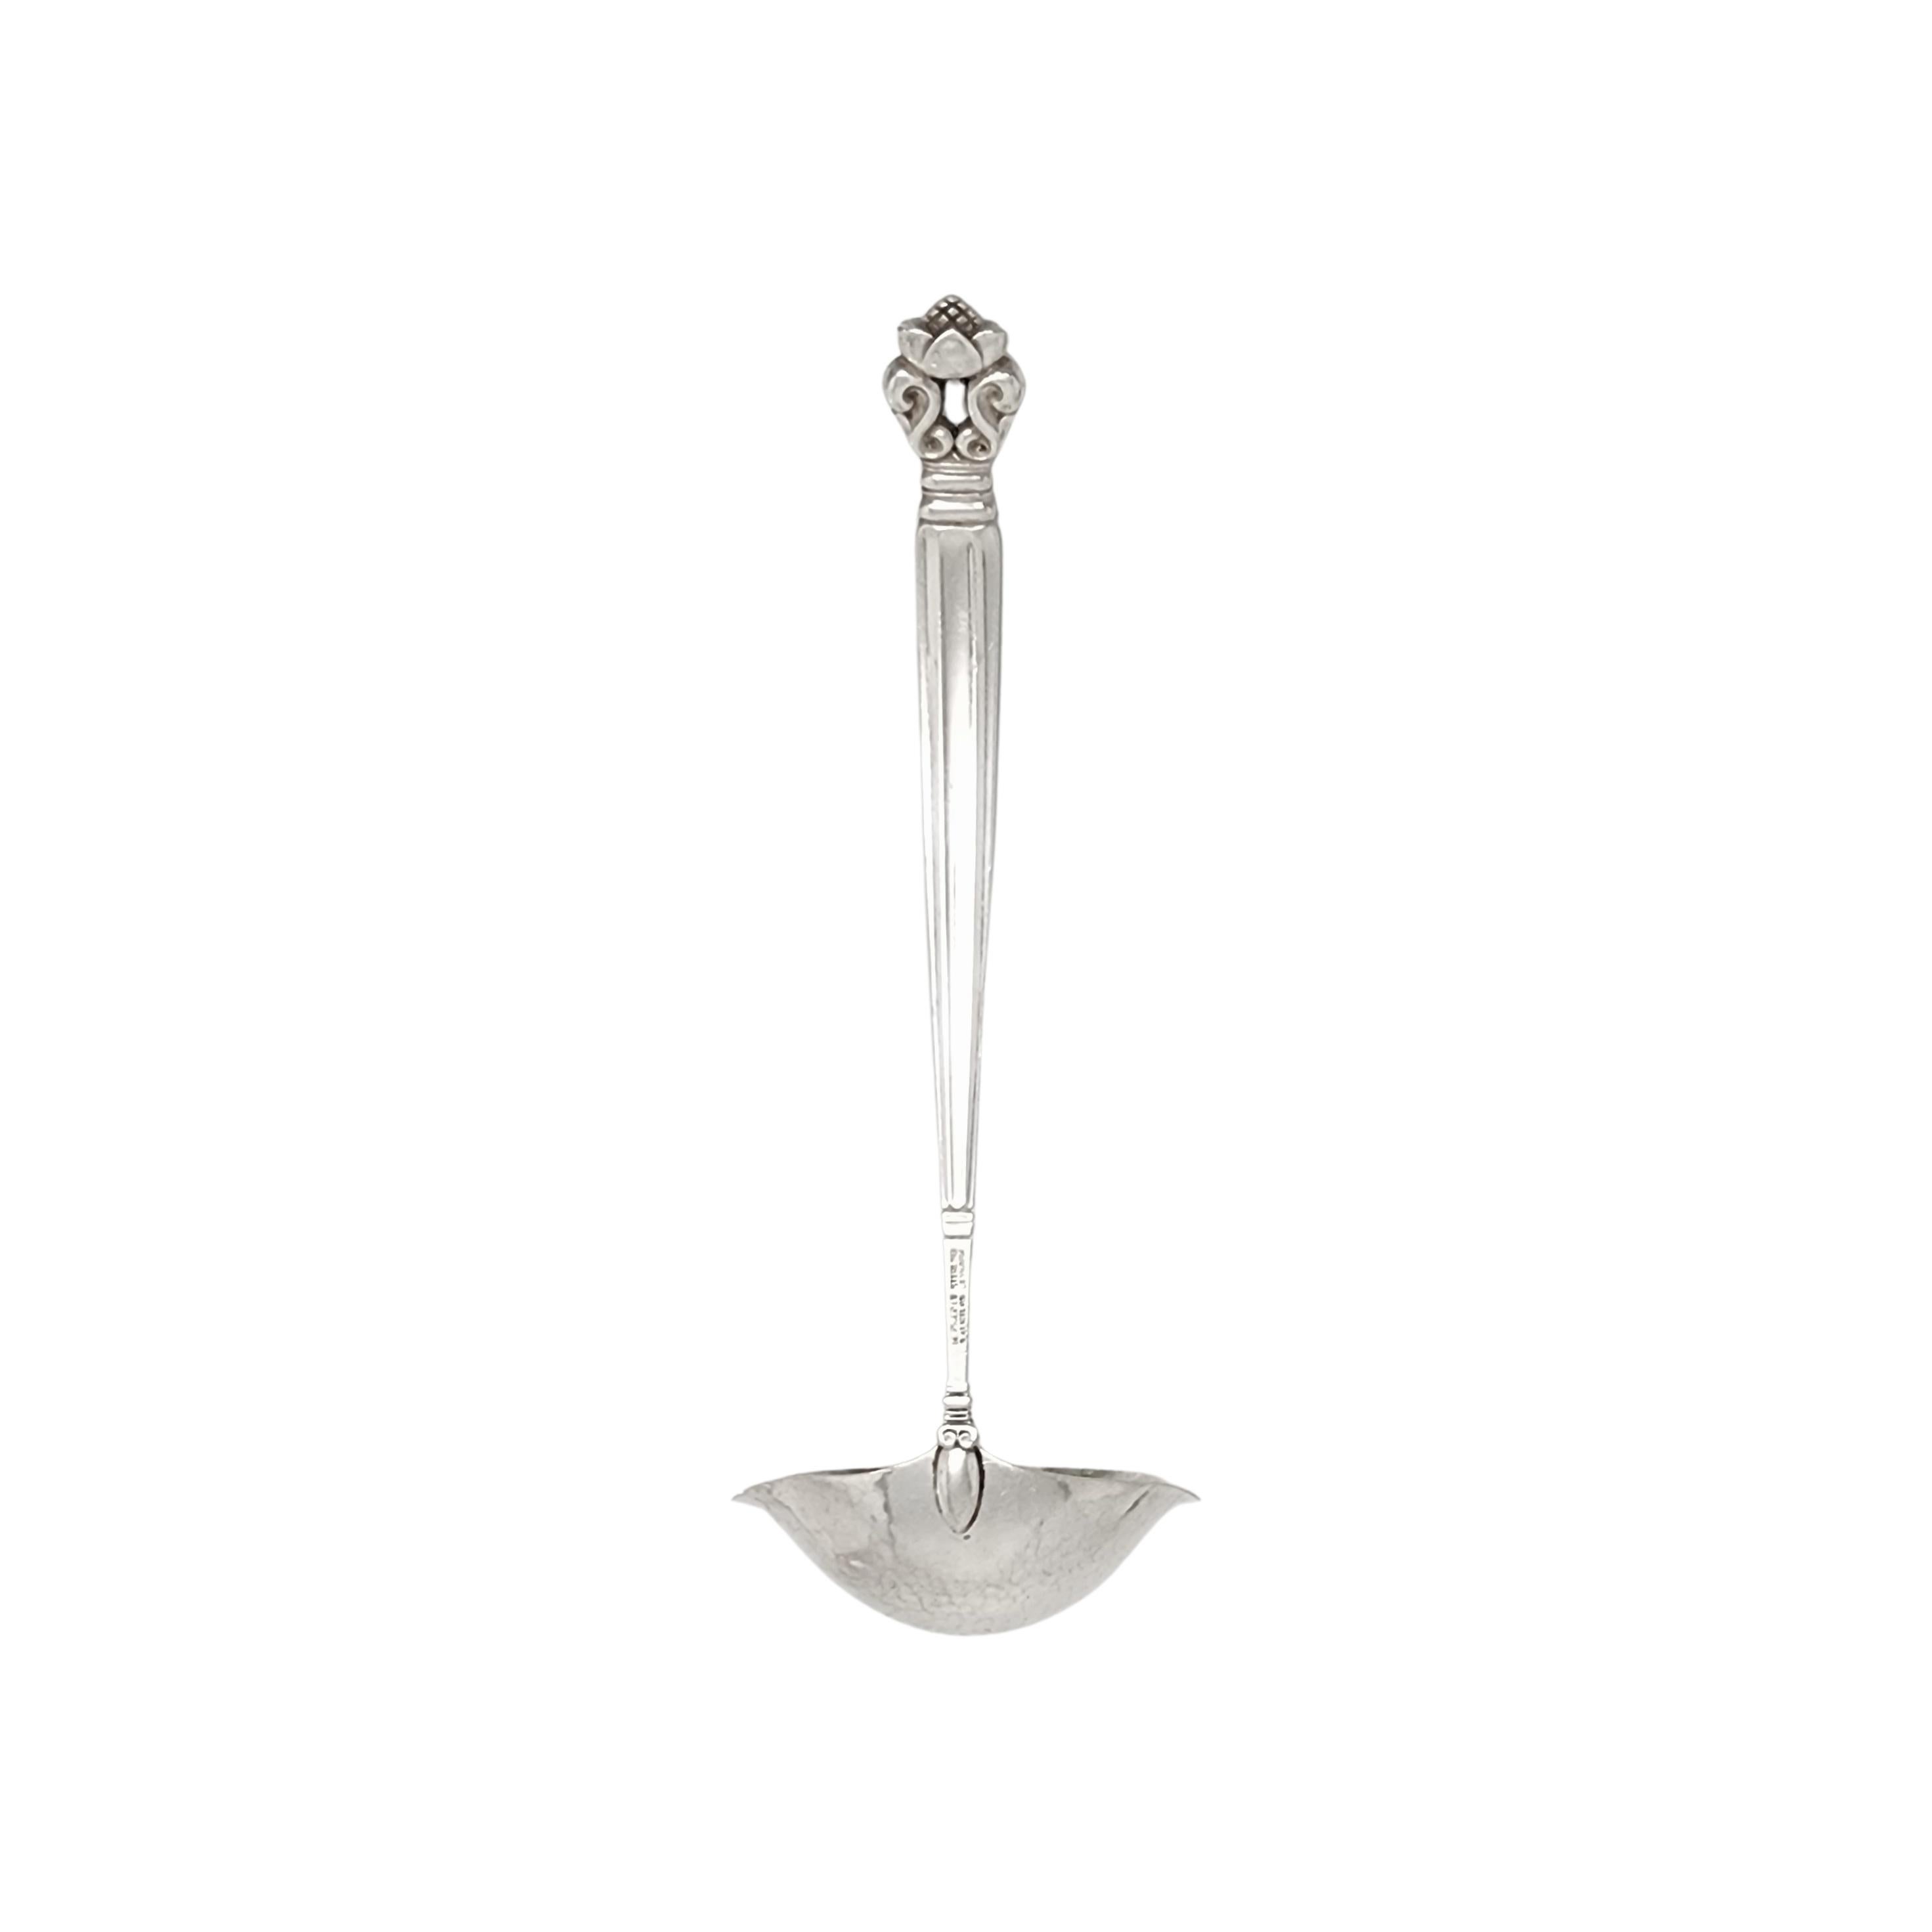 Sterling silver gravy ladle in the Acorn pattern by Georg Jensen.

The Acorn pattern was introduced in 1915 as a collaboration between Georg Jensen and designer Johan Ronde. The Acorn pattern, which combines Art Nouveau and Art Deco styles, has